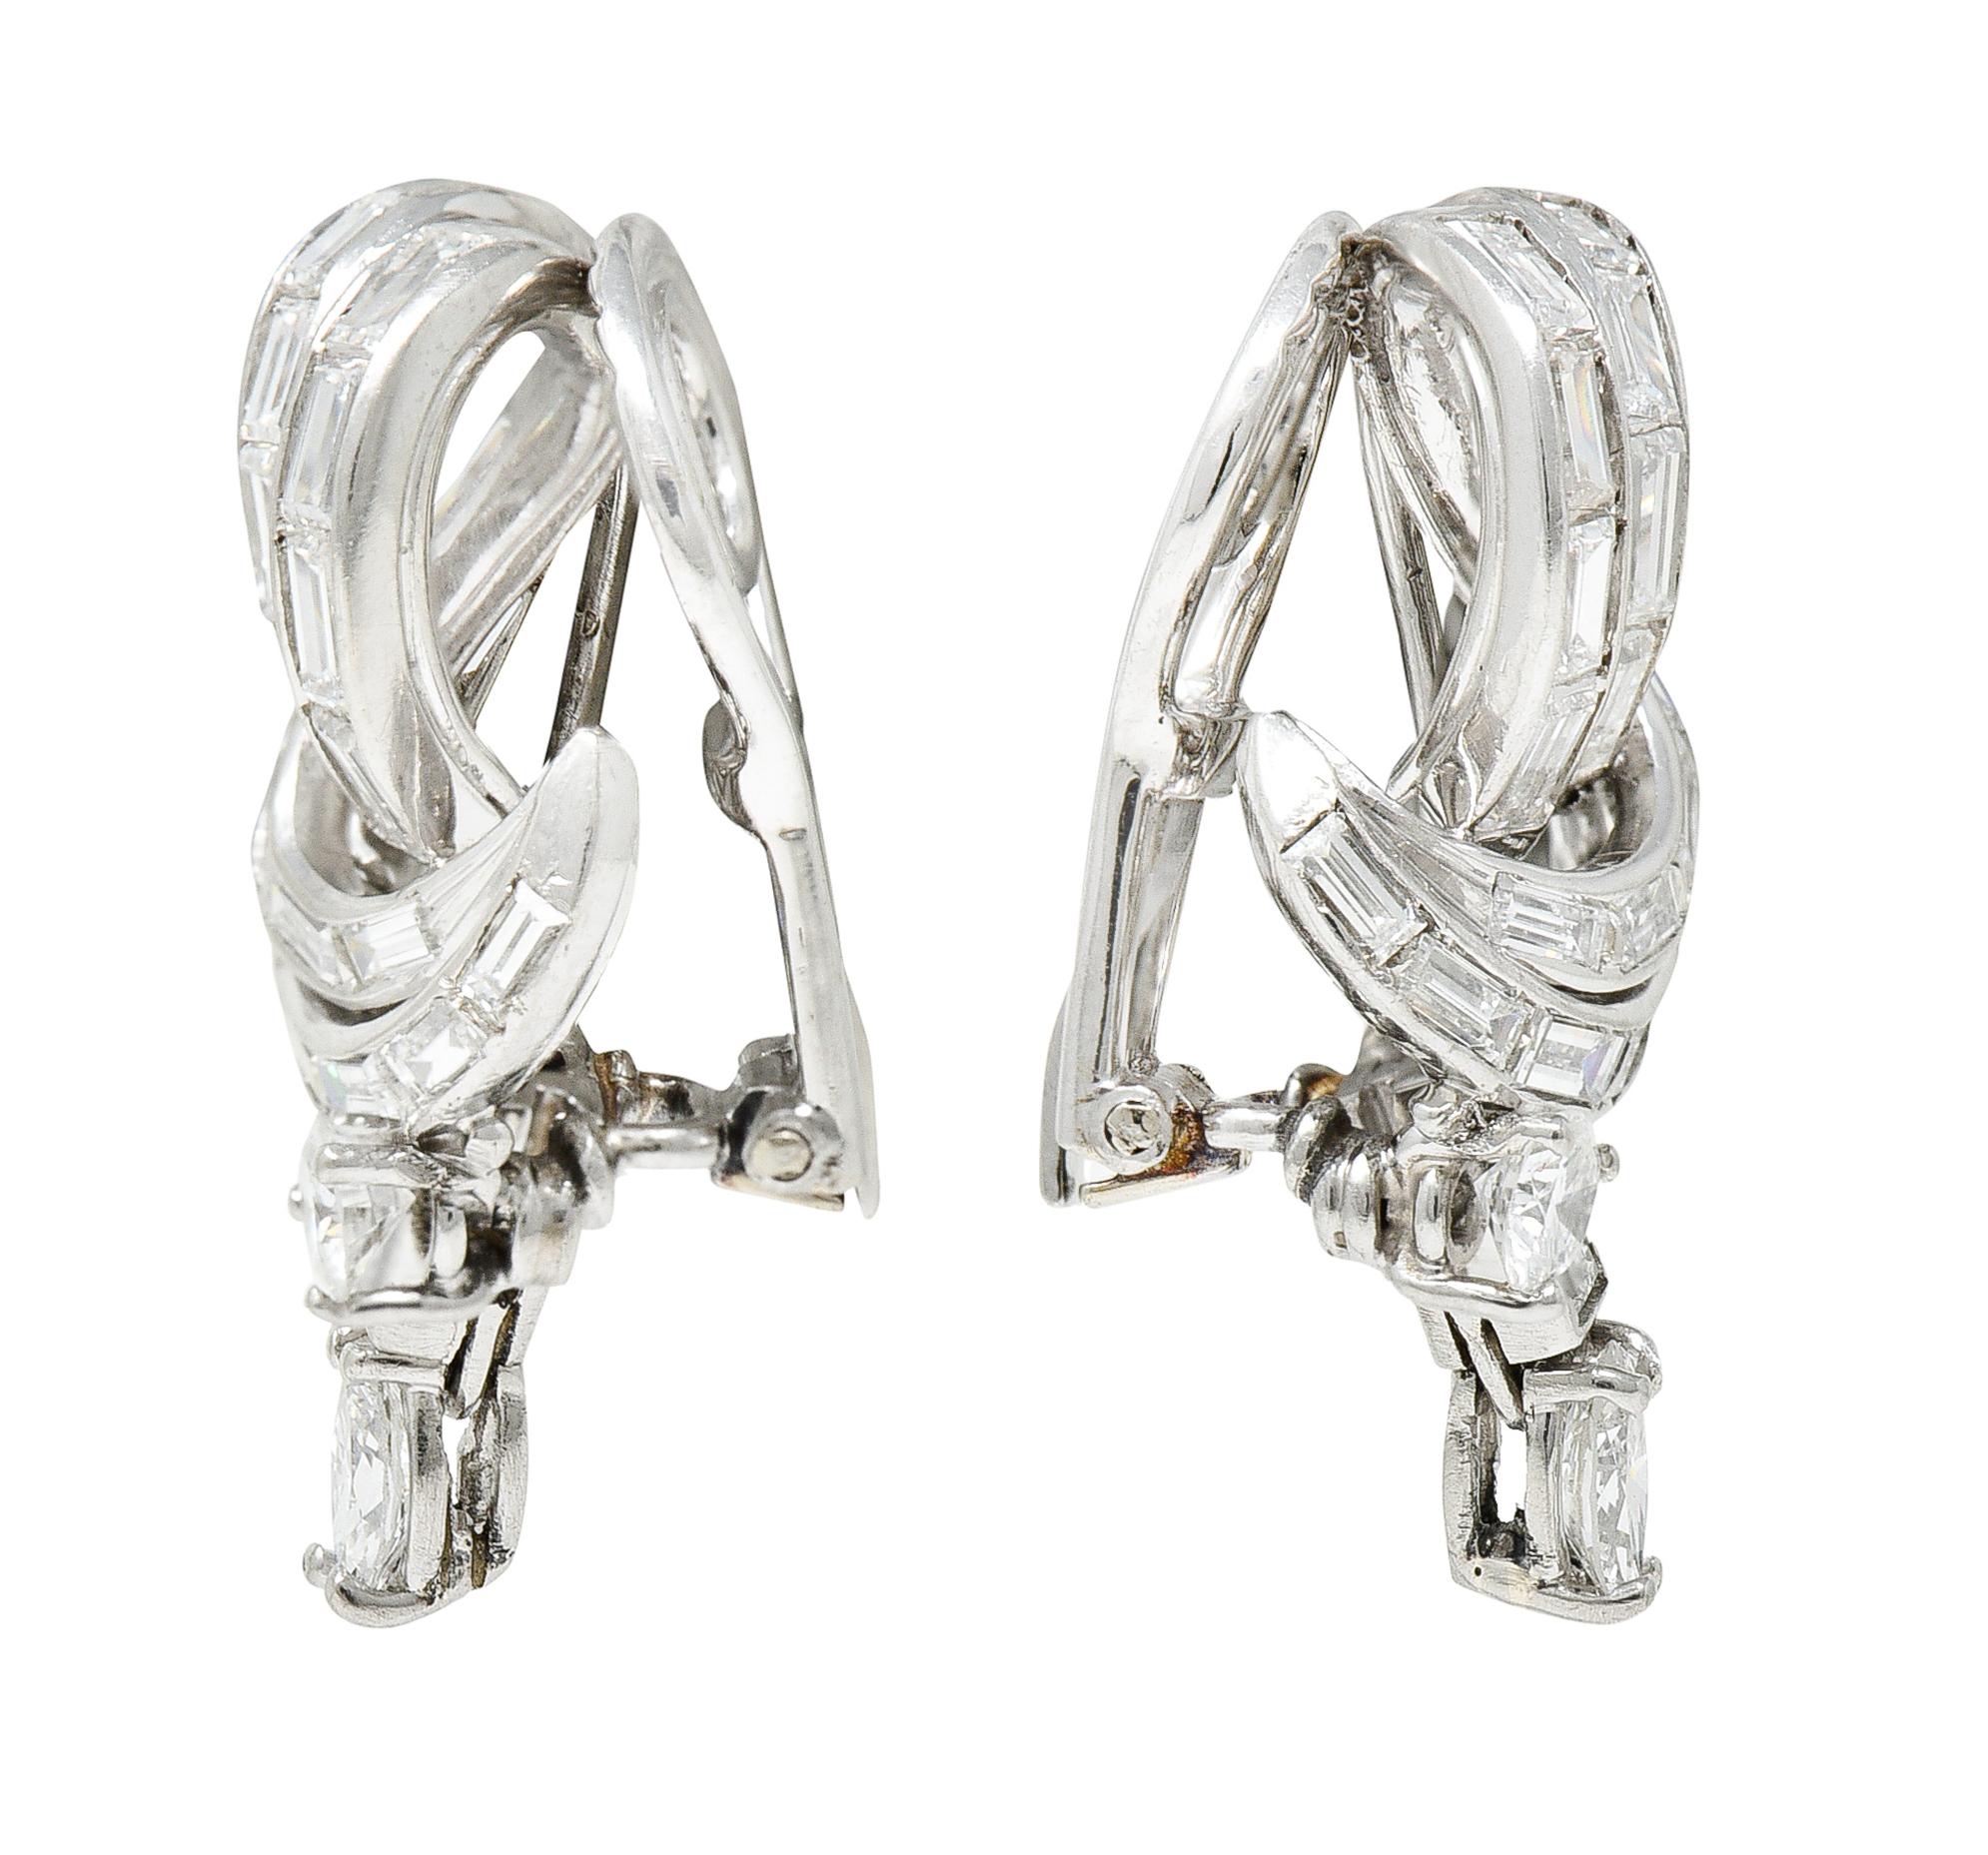 Ear-clips are designed as a scrolling loop form with articulated basket set diamond drops

Channel set throughout by baguette cut diamonds and accented by marquise and round brilliant cut diamonds

Weighing in total approximately 4.50 carats with G